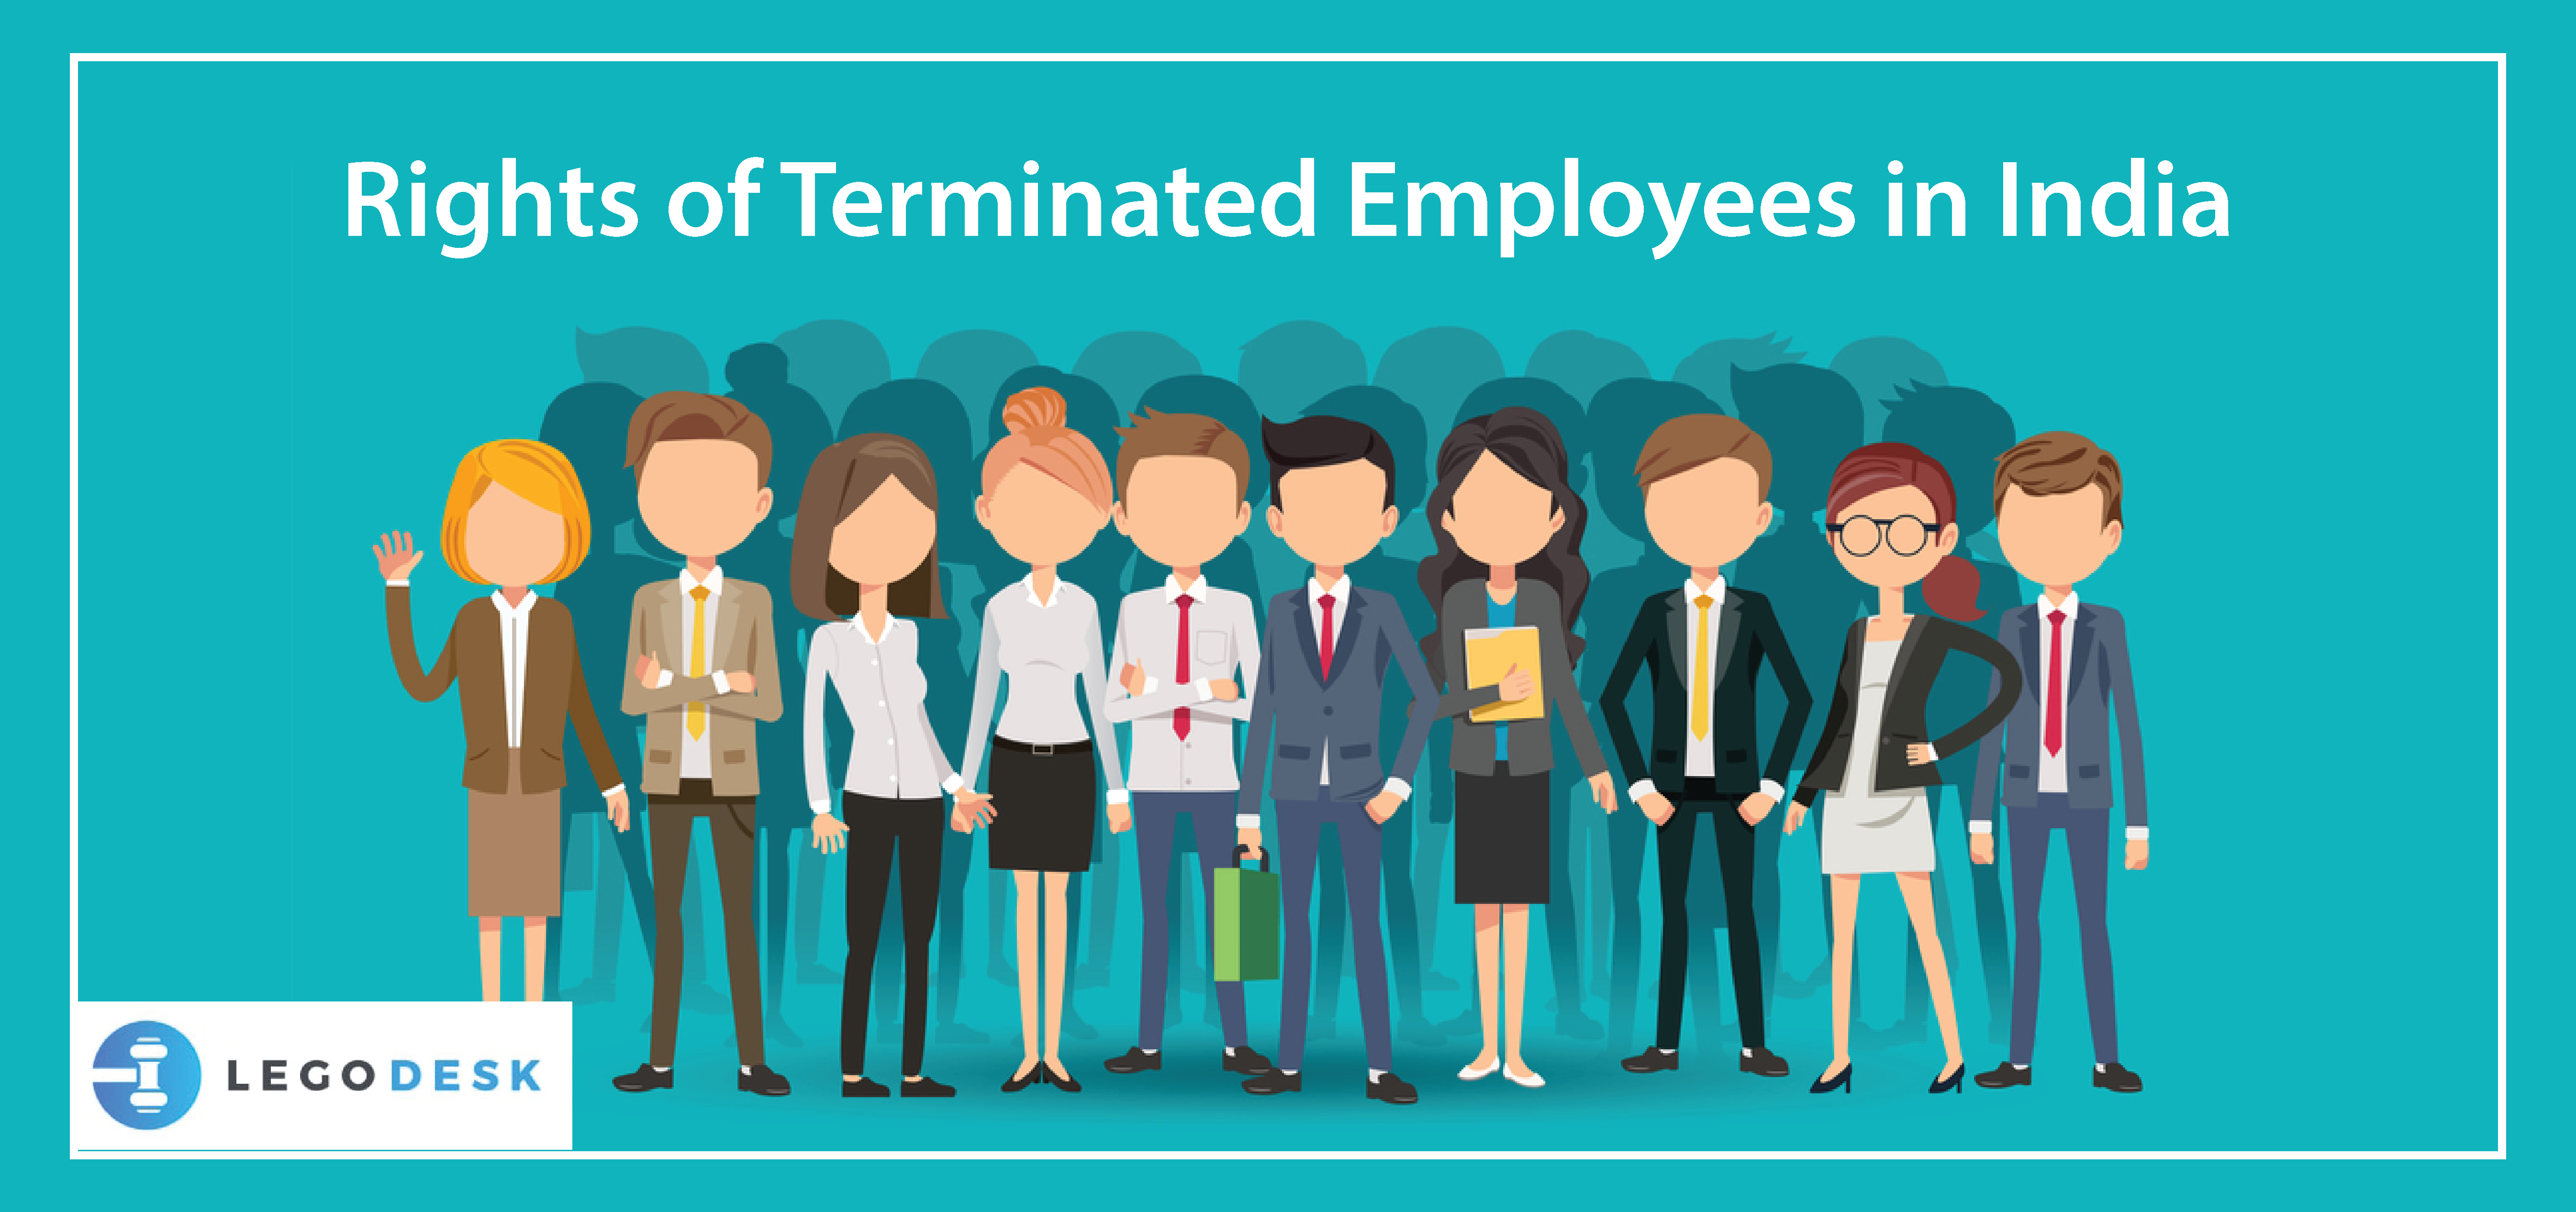 Rights of Terminated Employees in India